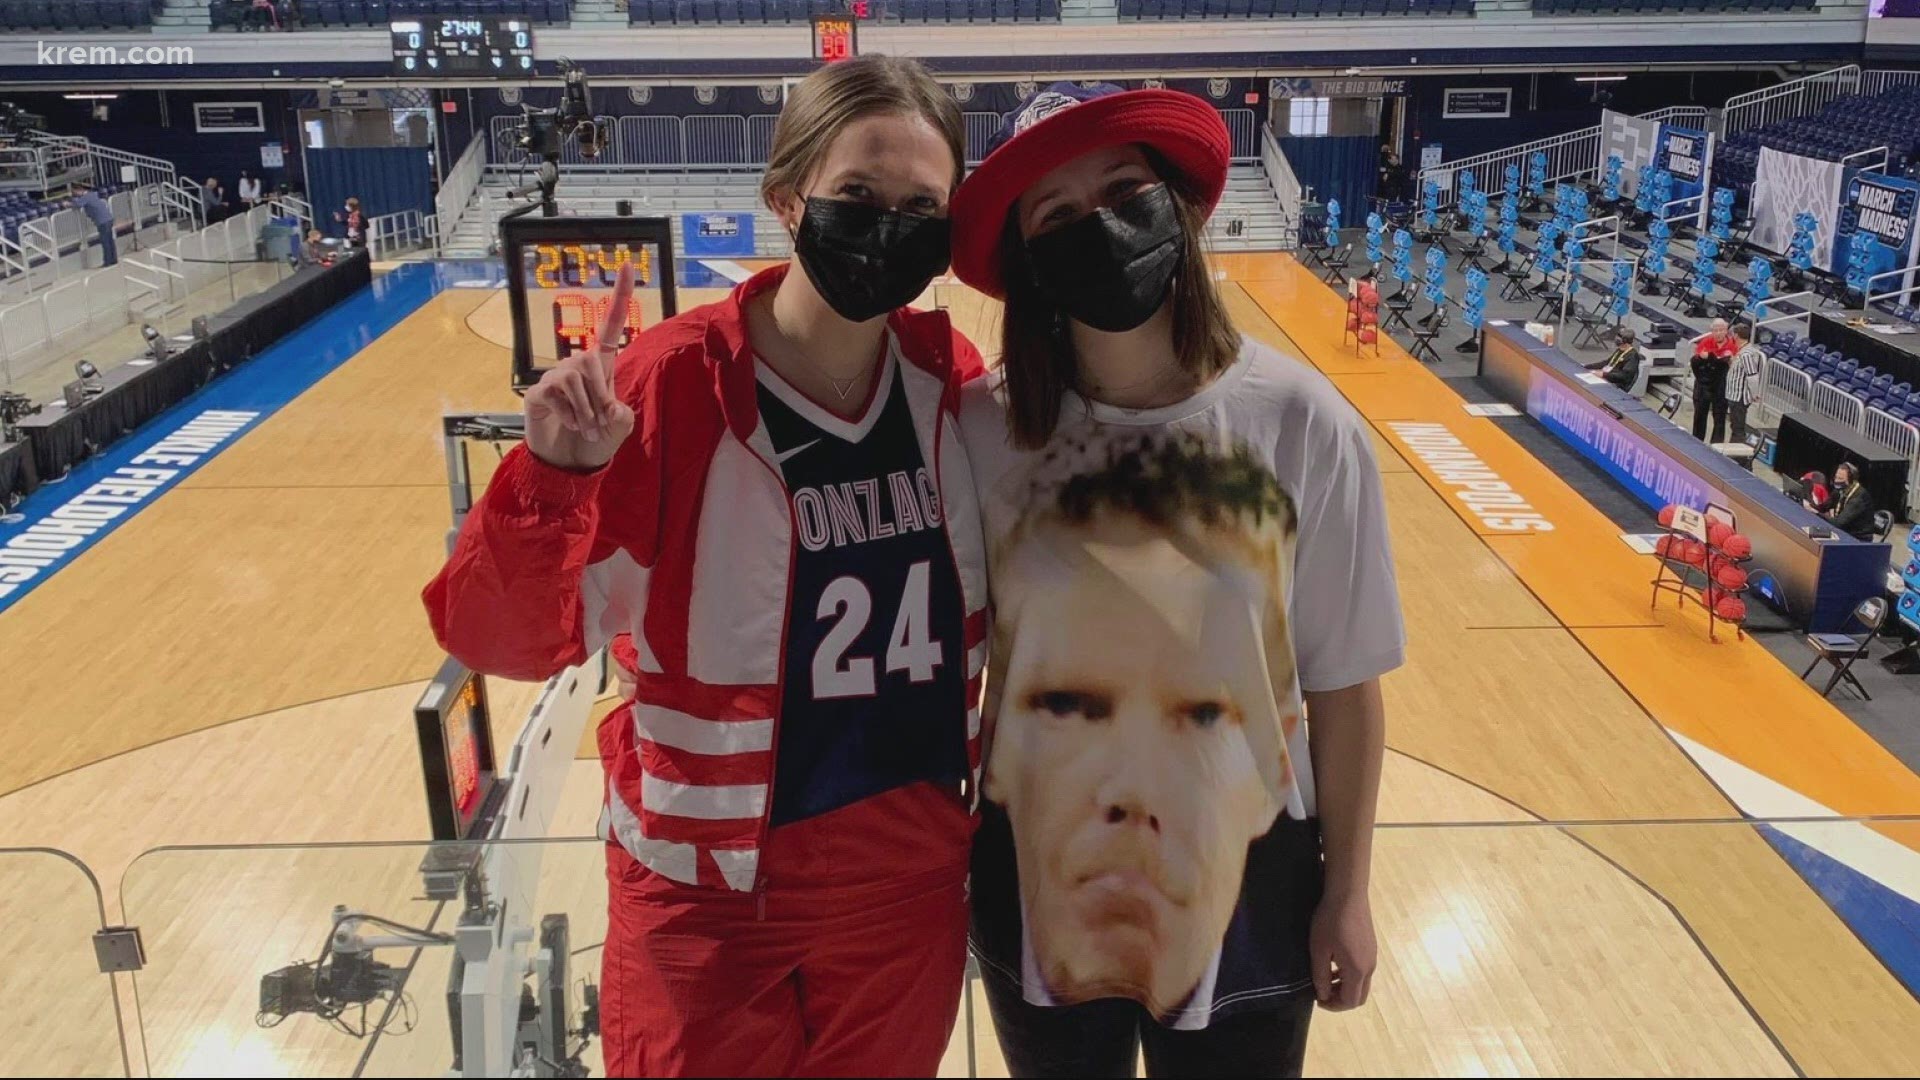 The Gonzaga University senior and junior made the journey all the way to Indianapolis for the first and second rounds of the NCAA Tournament.